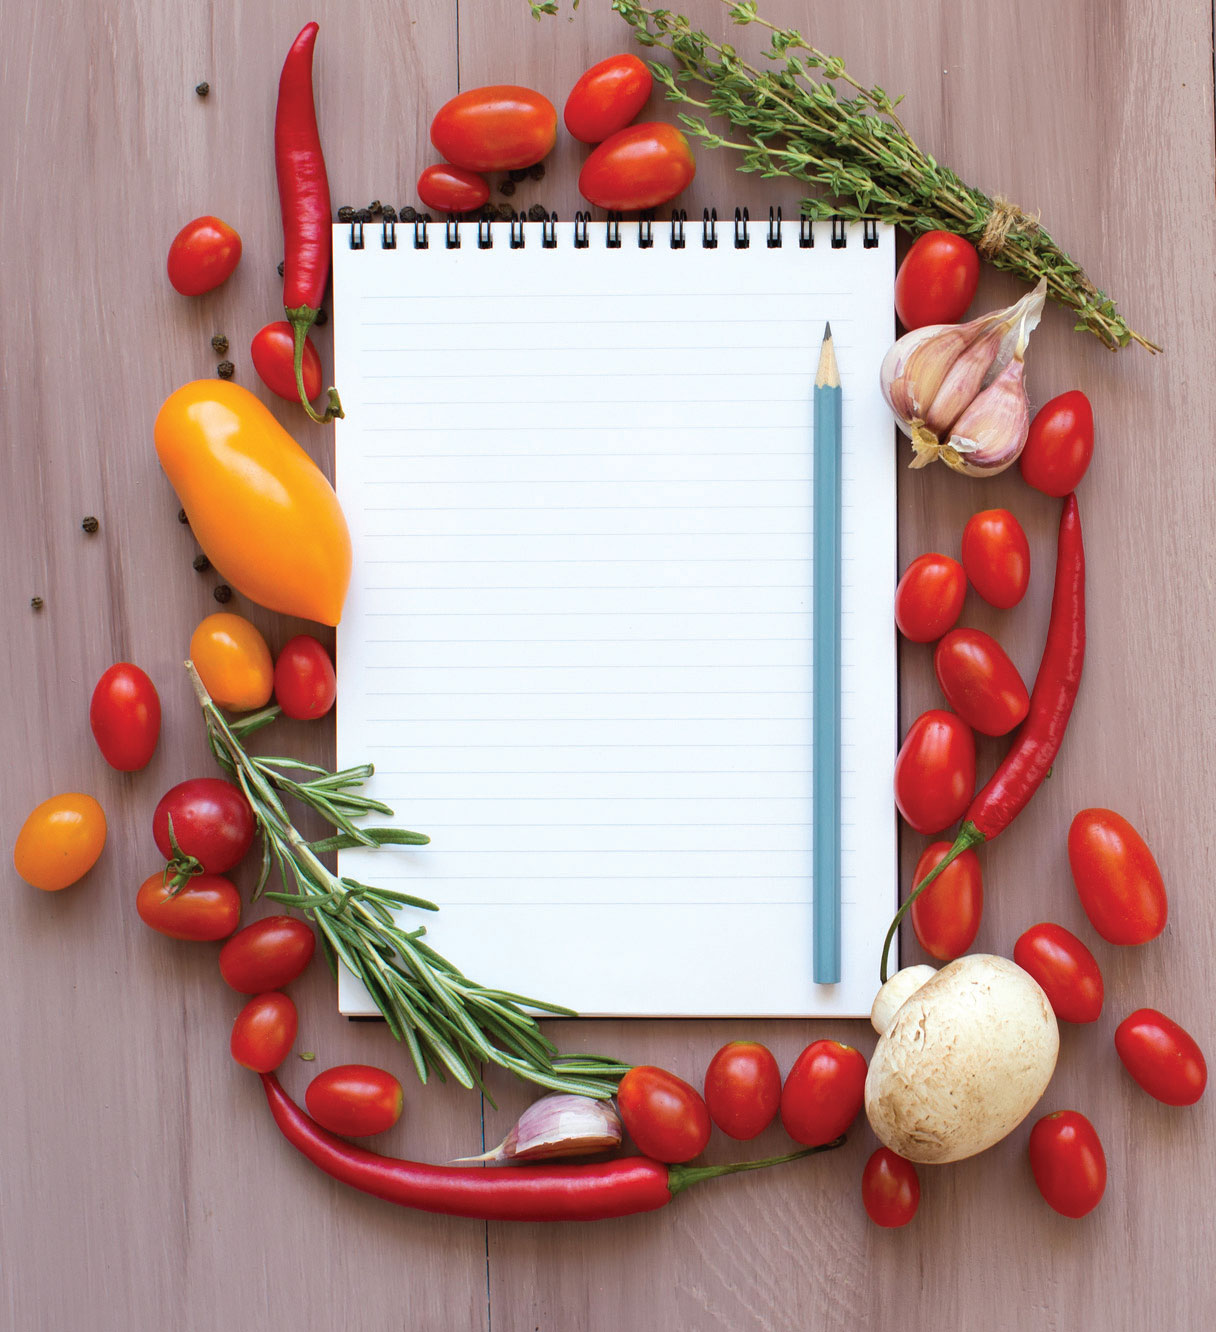 A notepad surrounded by vegetables